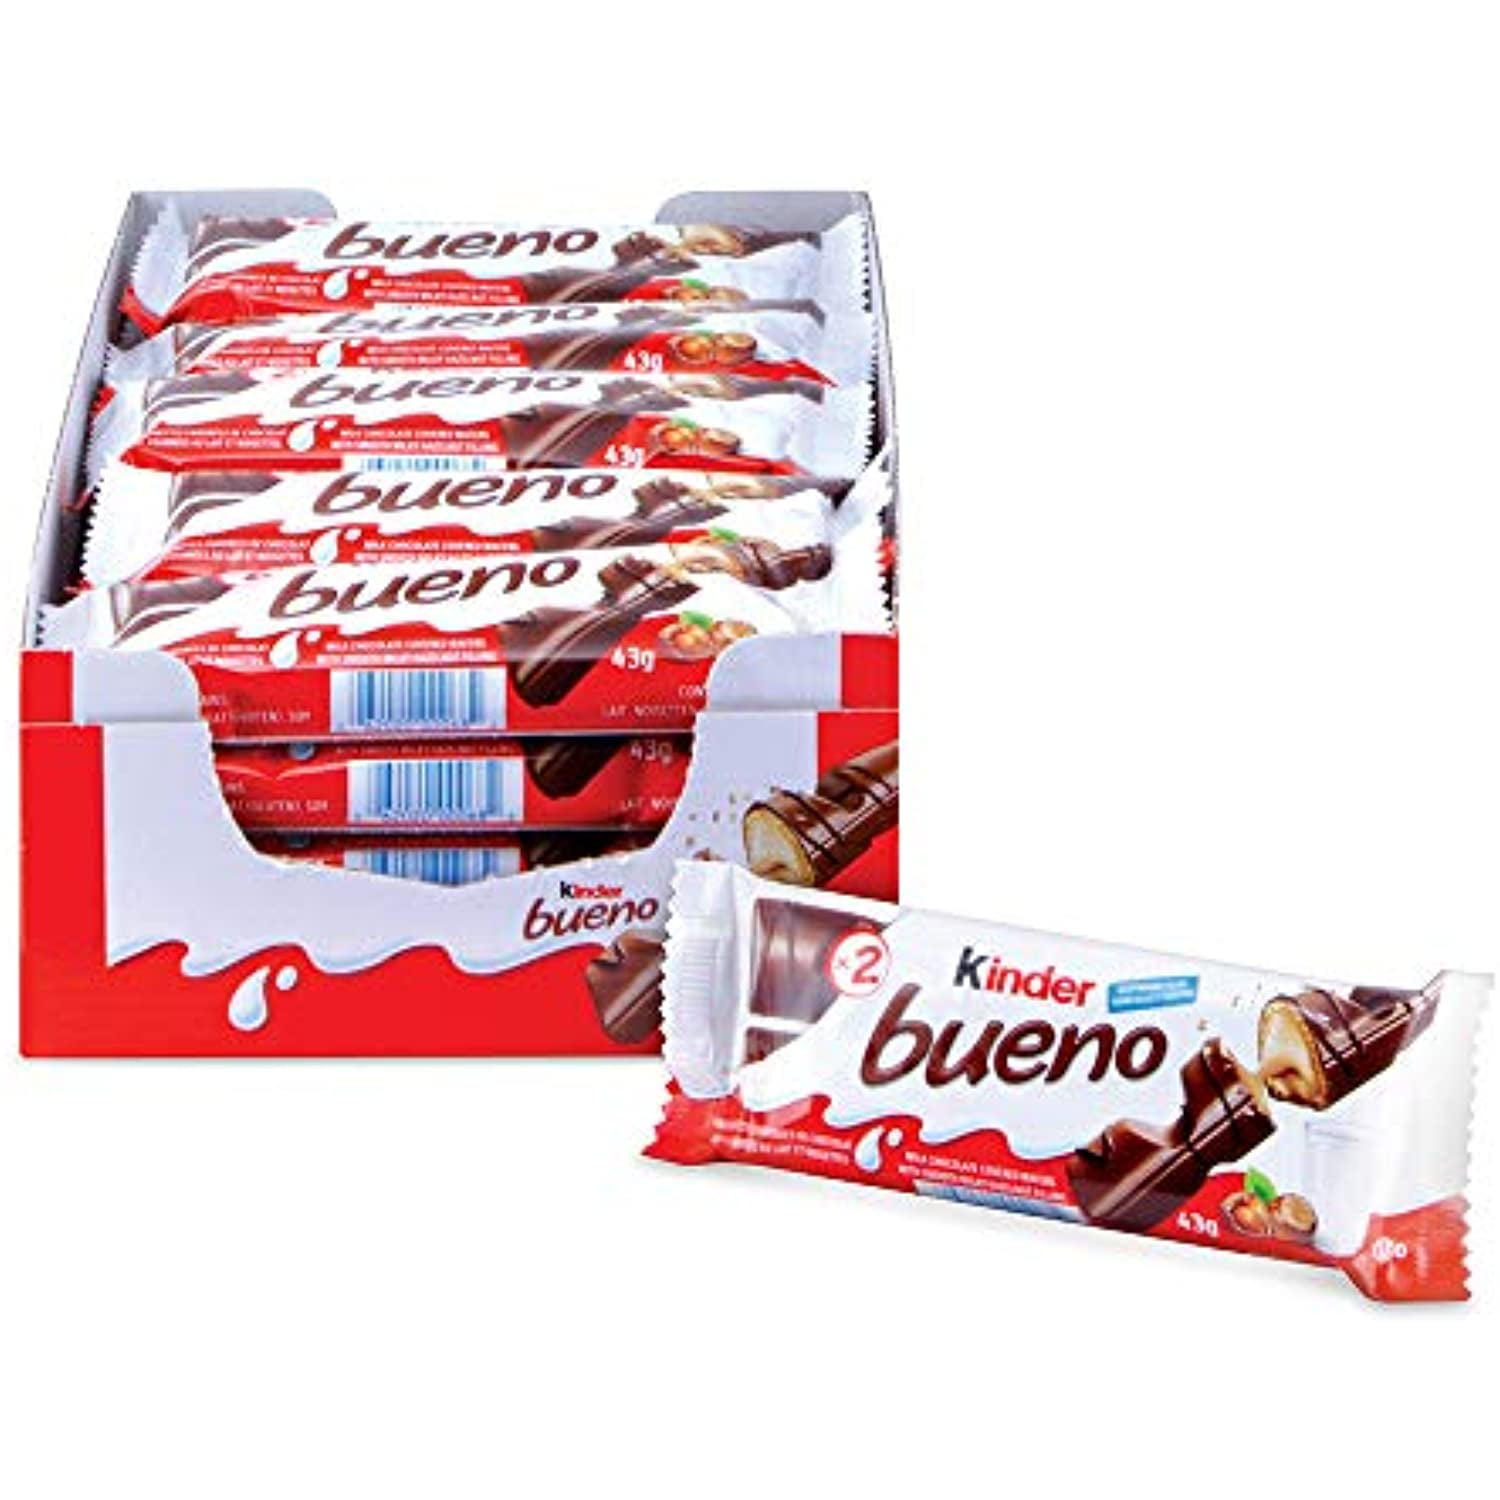 {Imported Kinder Canada} - Bueno from 20x43g